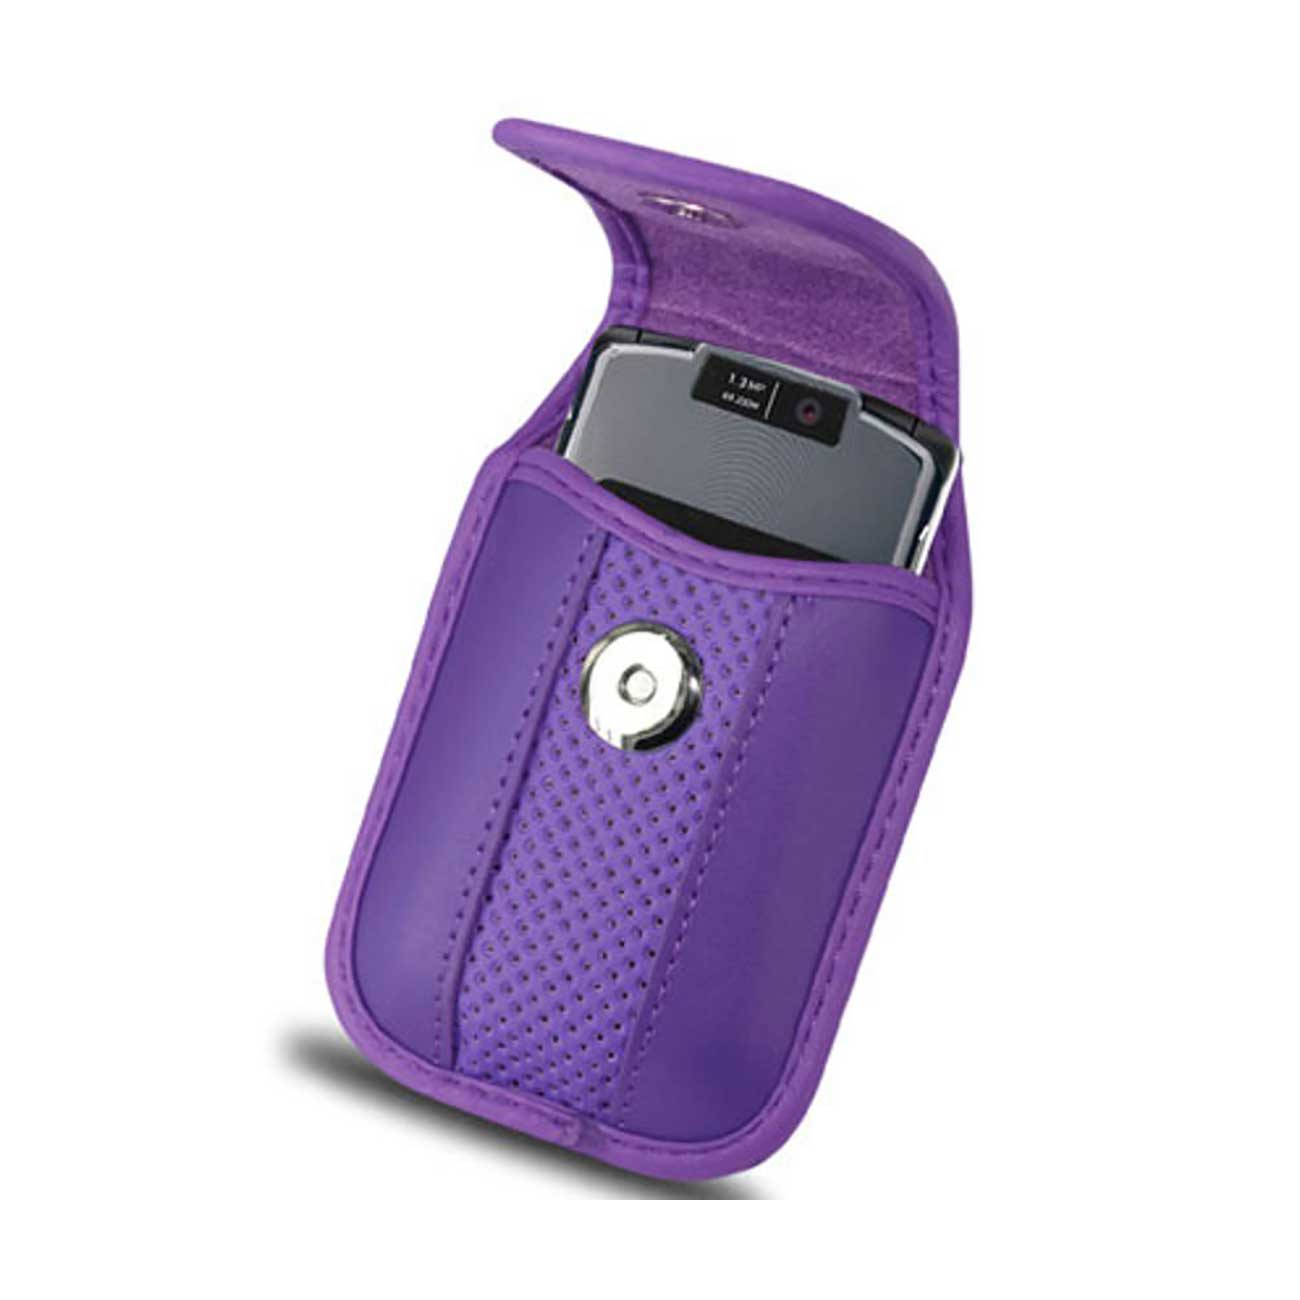 Vertical Pouch/Phone Holster Vp11A Motolola V3 Purple 4X0.5X2.1 Inches